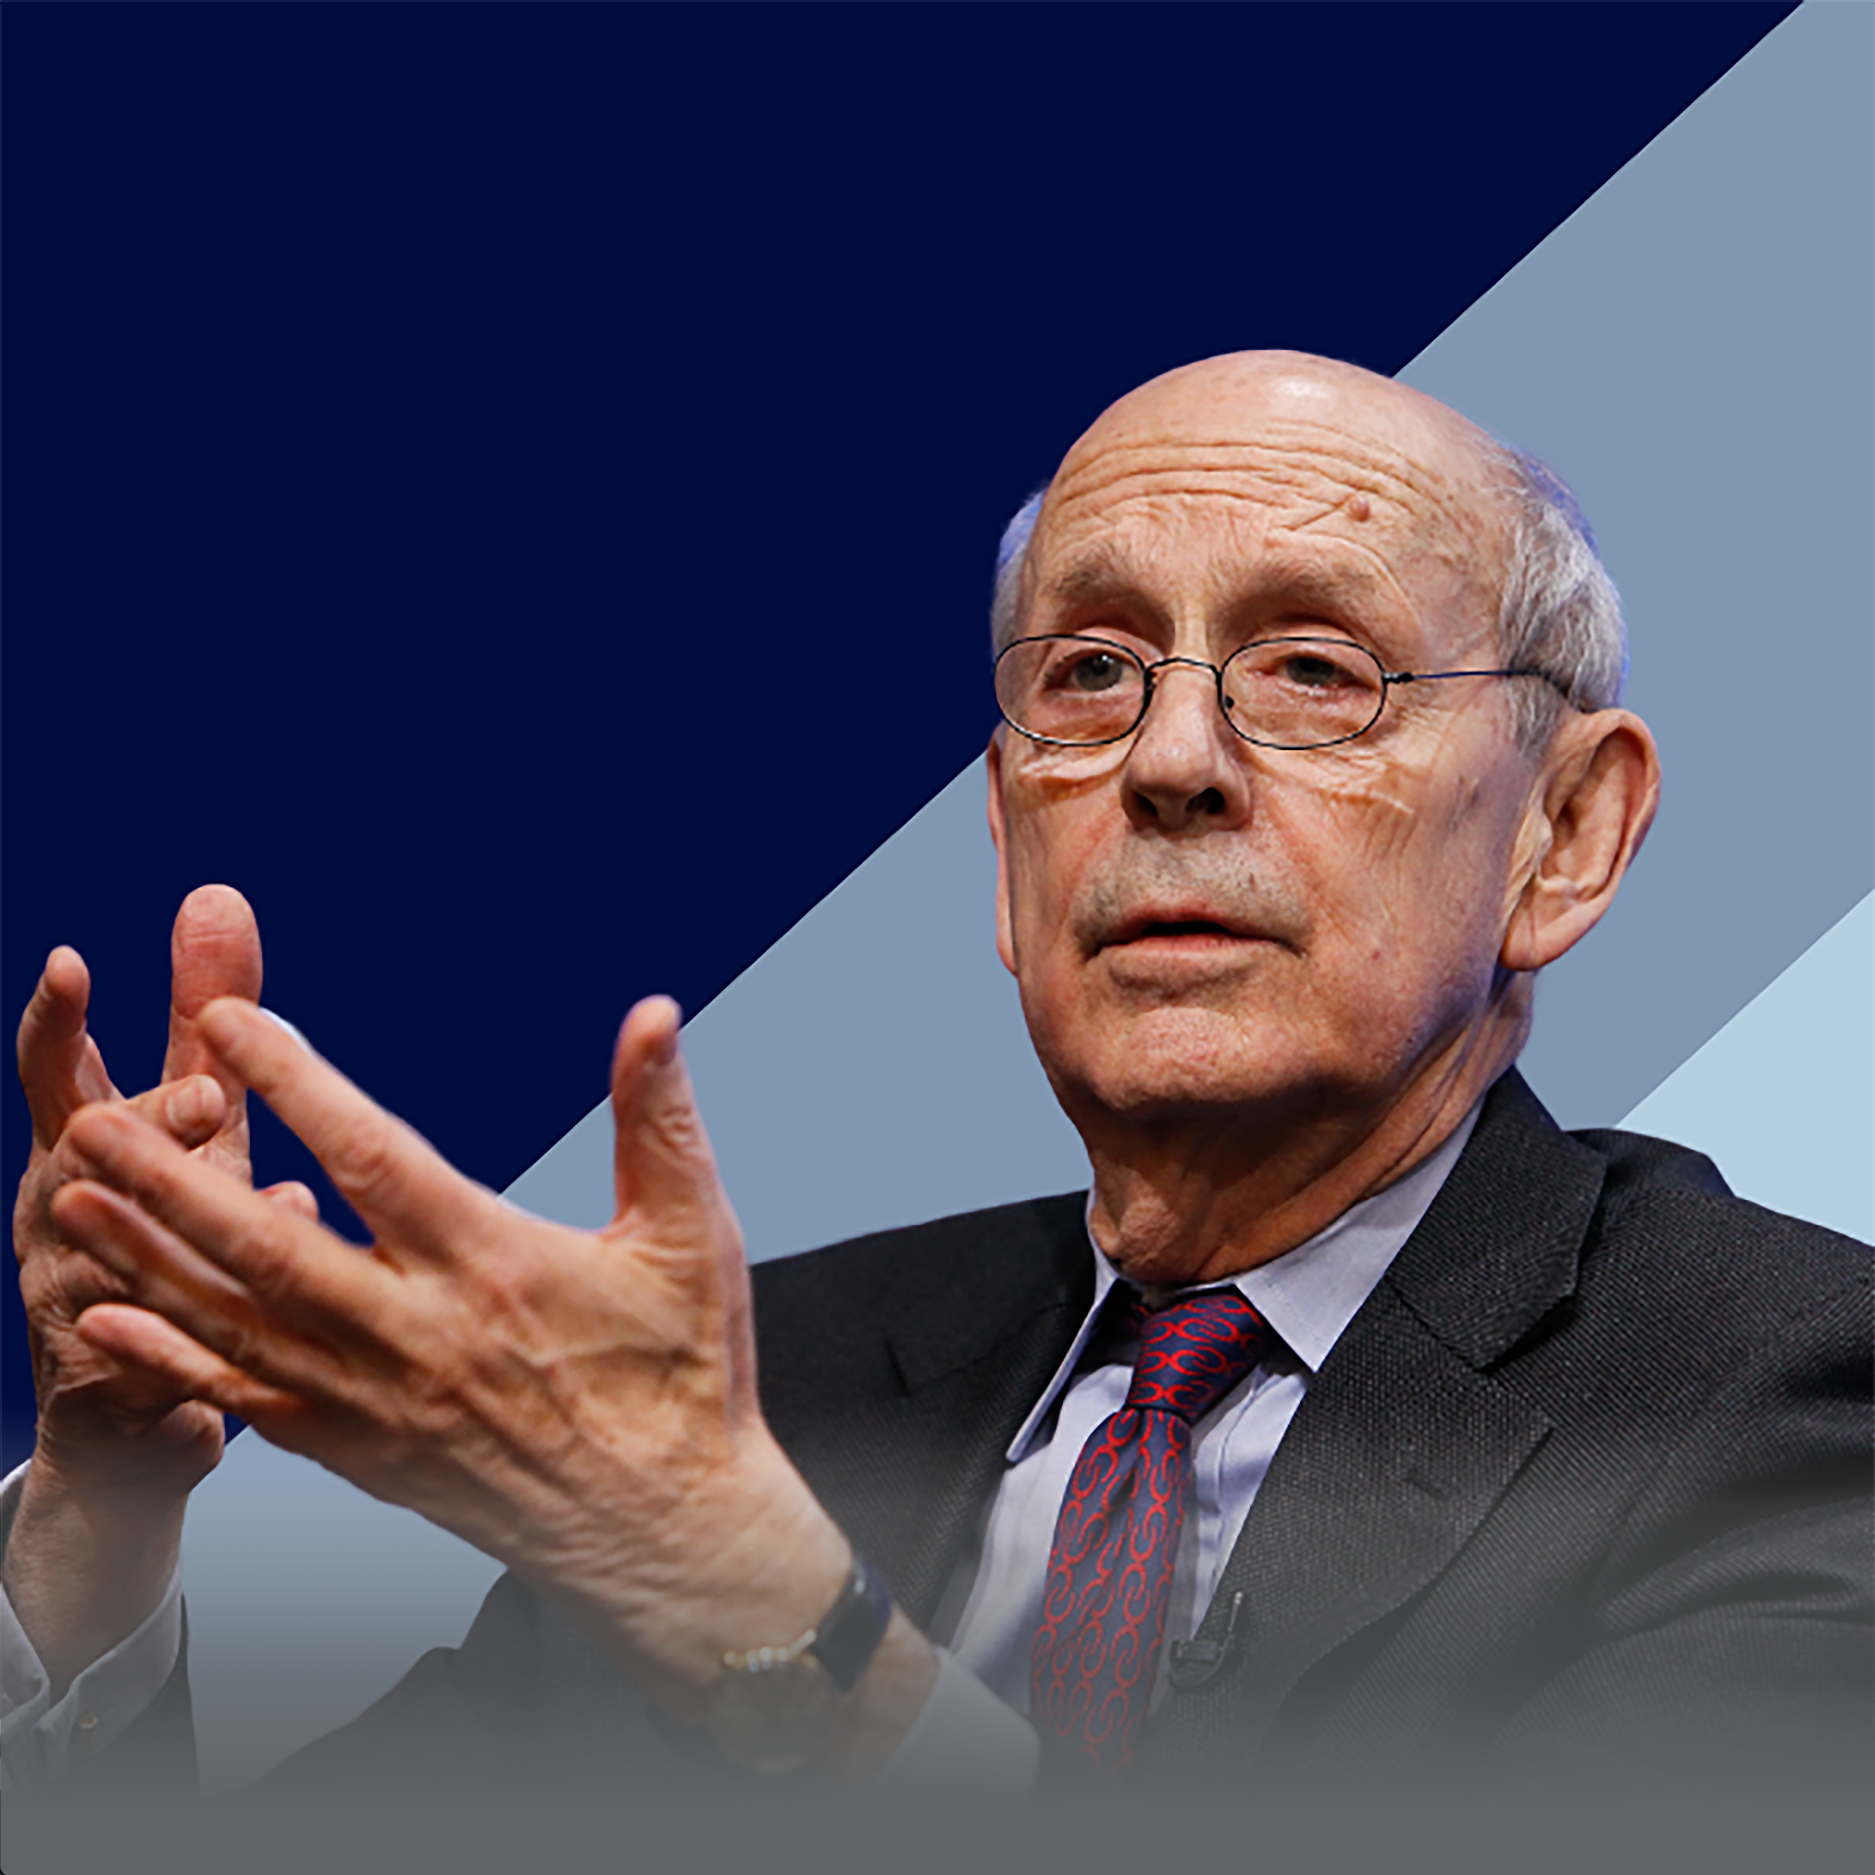   Sandeep Vaheesan , our legal director, wrote a fiery exposé in   Balls and Strikes   of how Supreme Court Justice Stephen Breyer has played a key role in the rise of monopoly and oligopoly across the economy. 